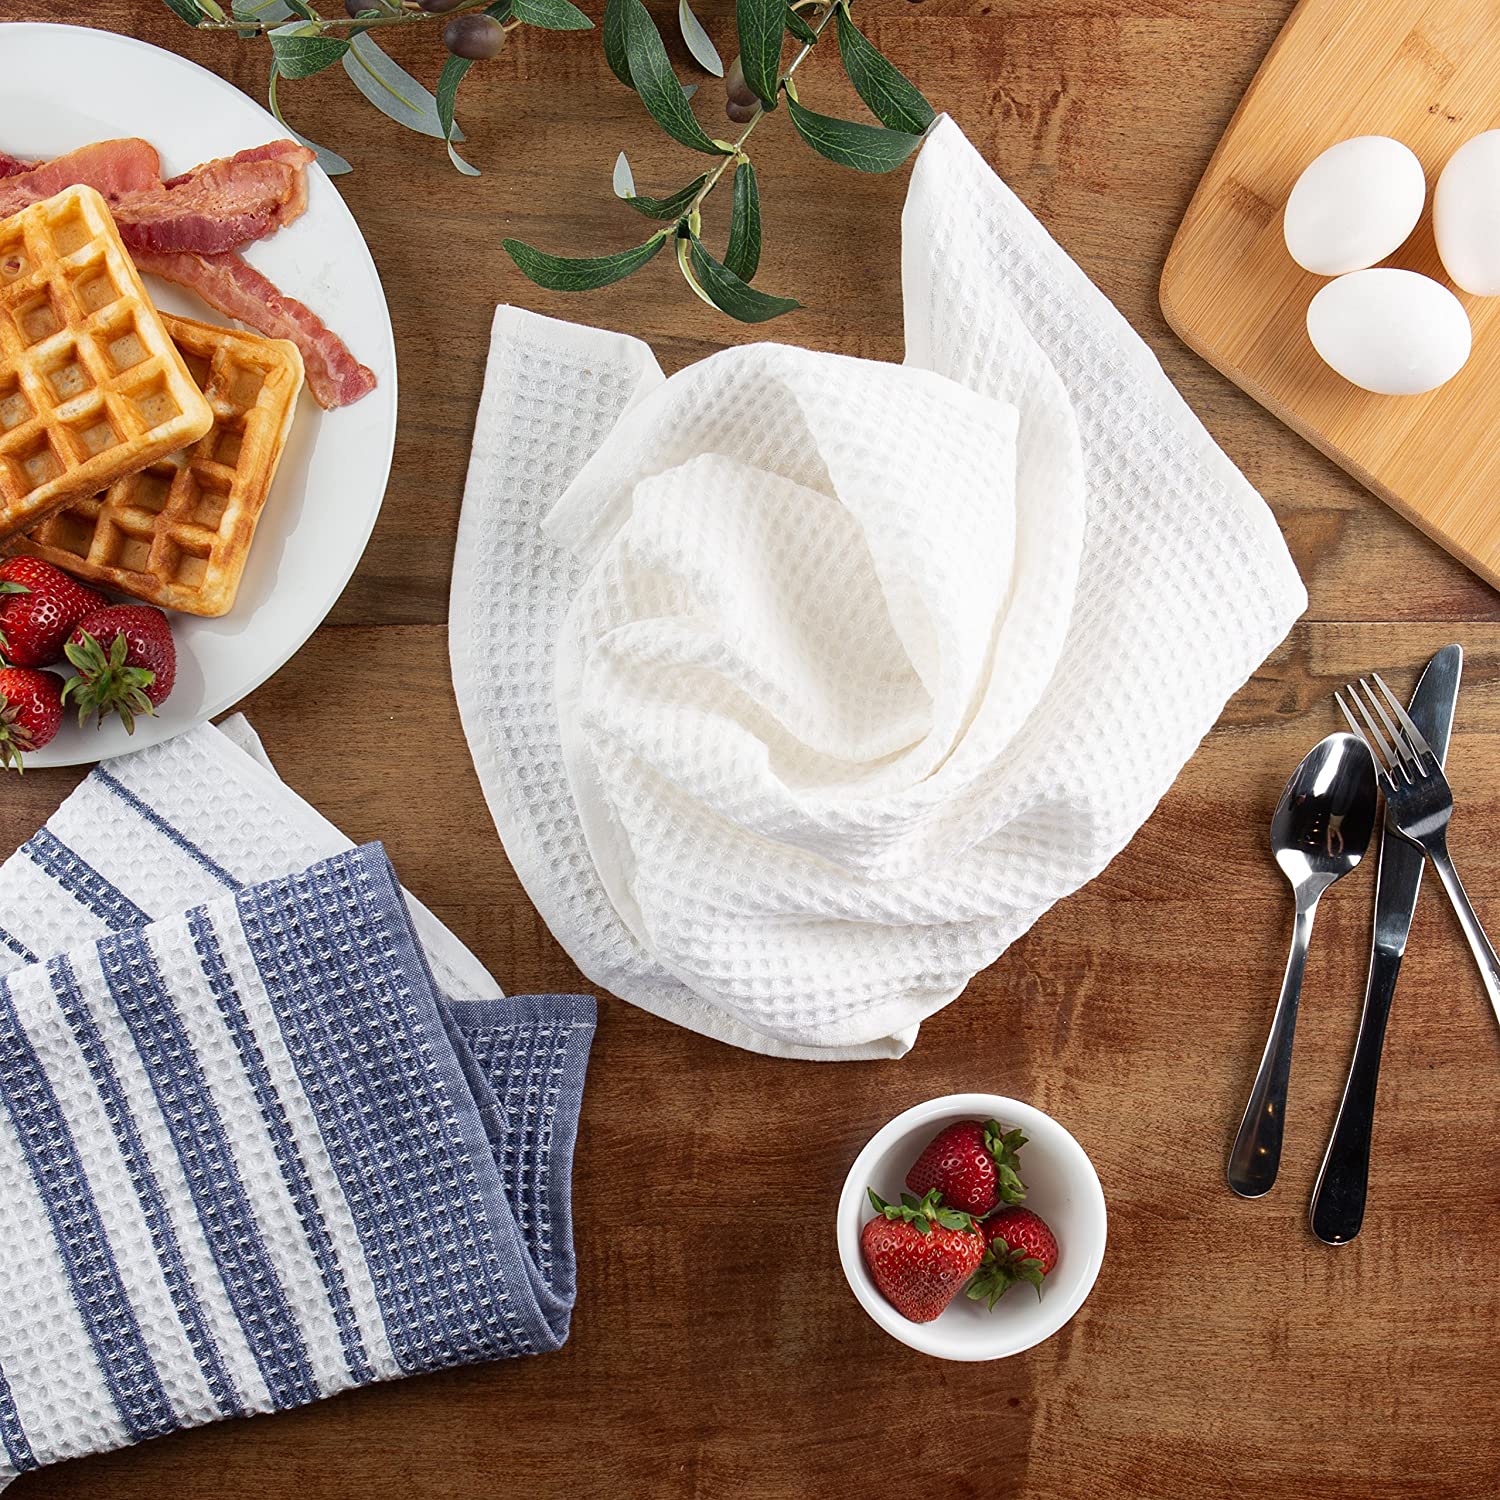 100% Cotton Waffle Weave Check Plaid Kitchen Towels, 13 x 28 Inches, Super  Soft and Absorbent Dish Towels for Drying Dishes, 4-Pack, White & Teal